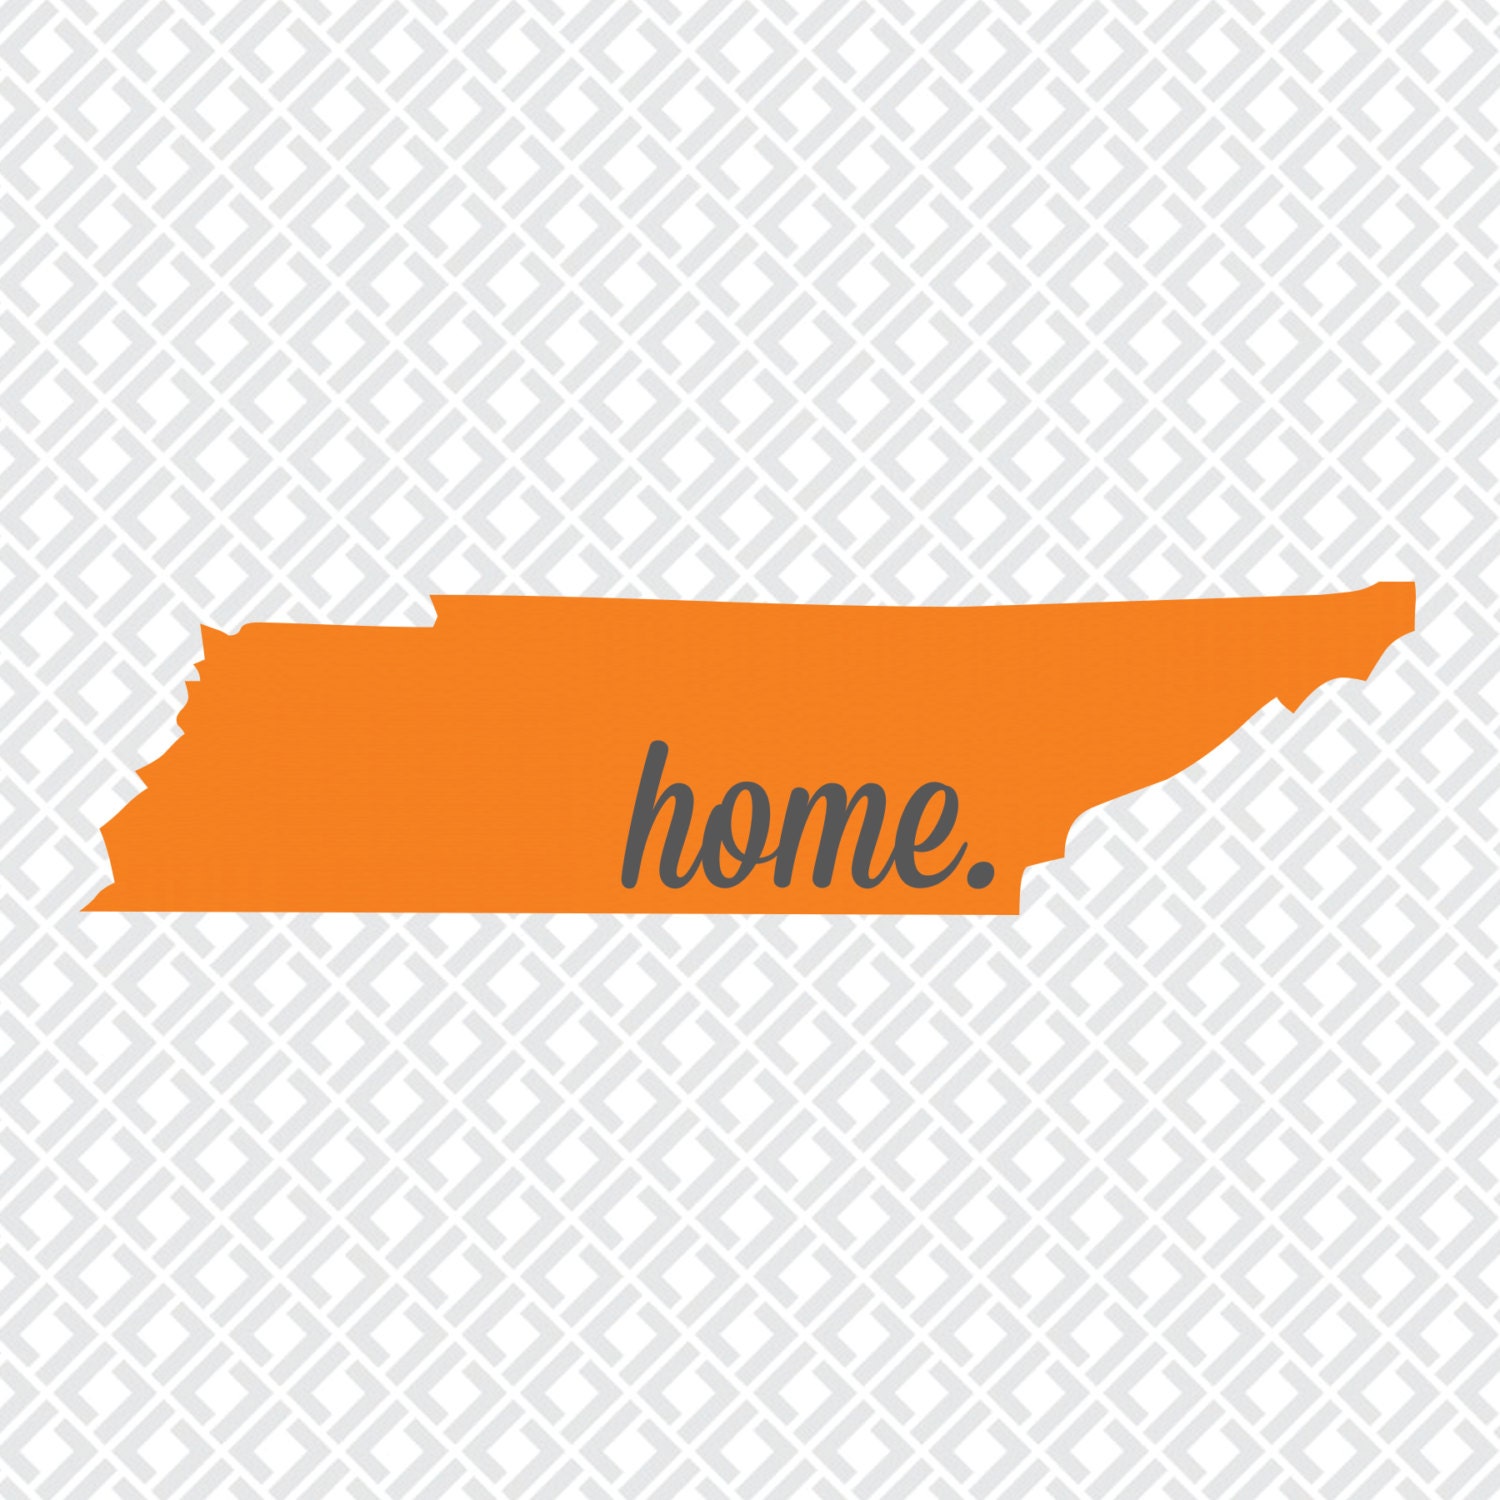 Download Tennessee Home Design for Cricut and Silhouette Machines